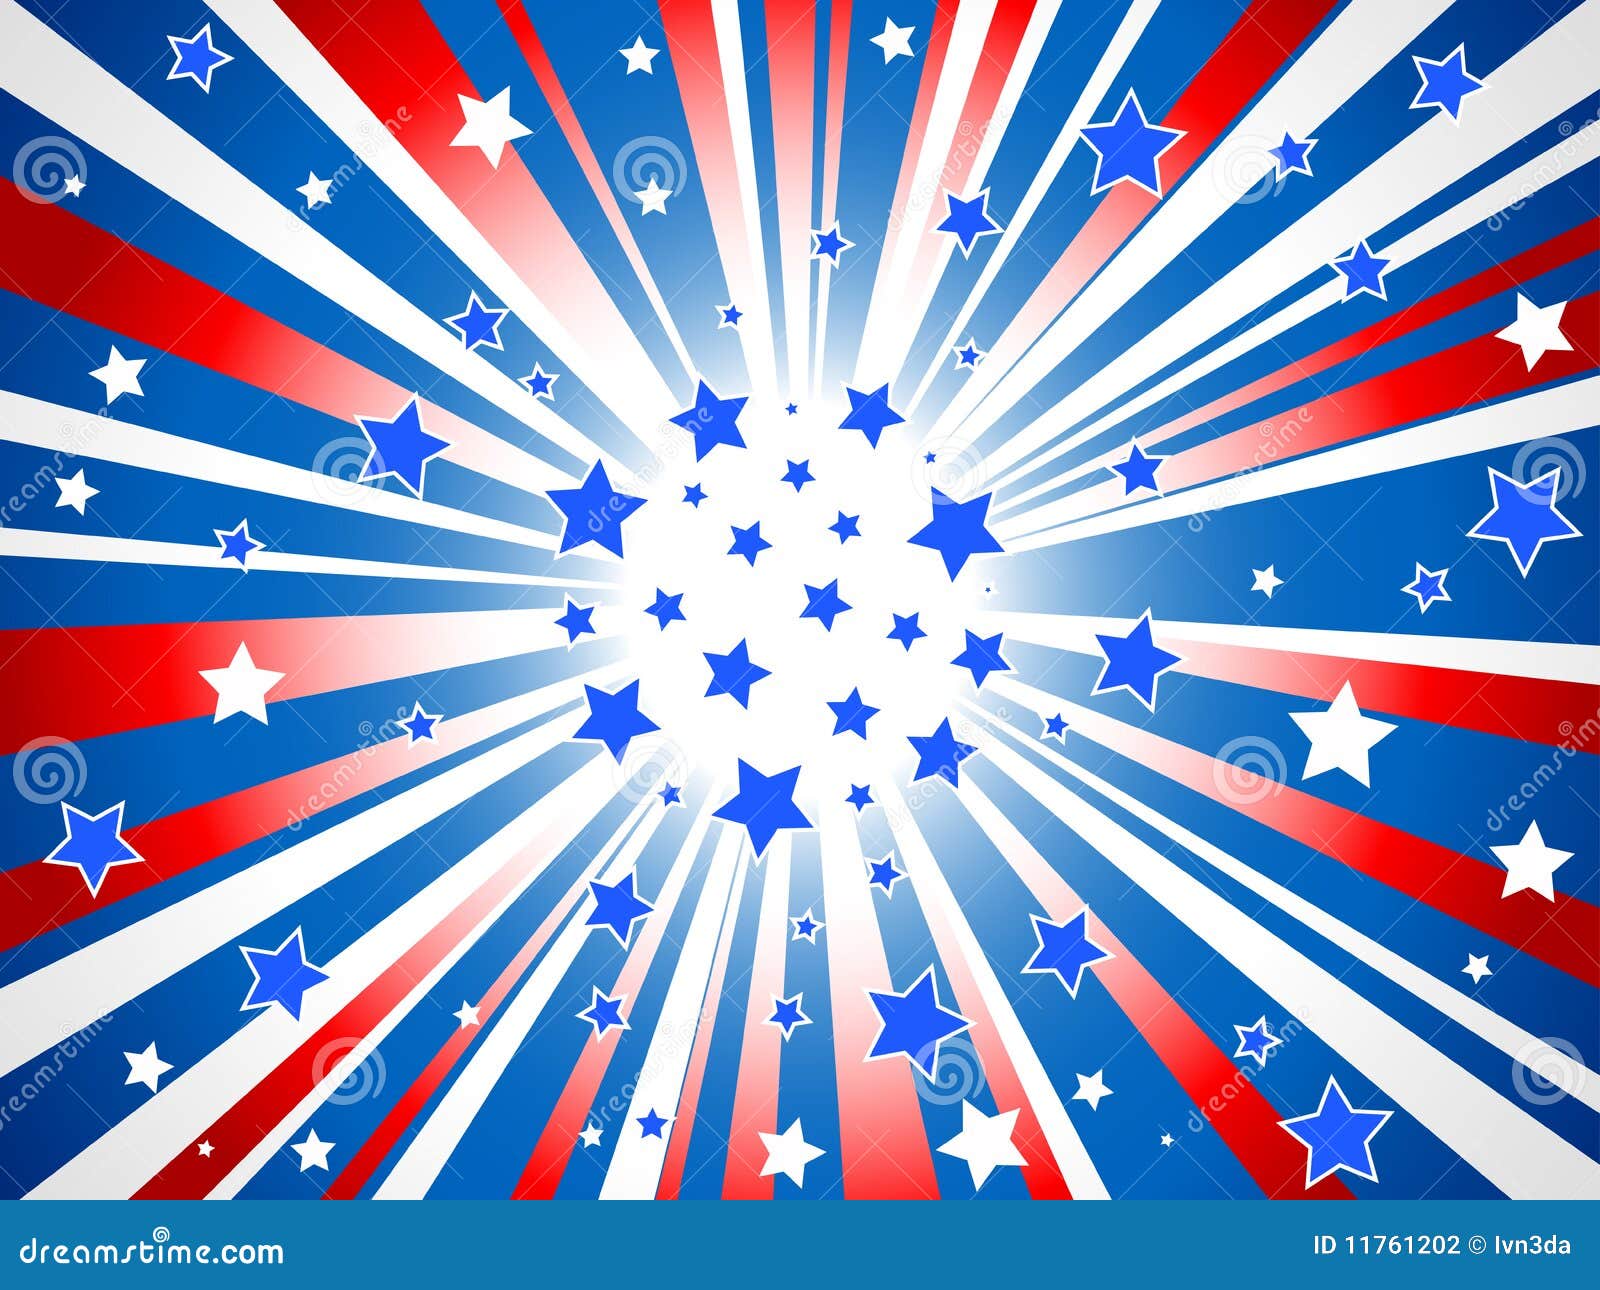 Abstract American Stars Background Stock Photography - Image: 11761202